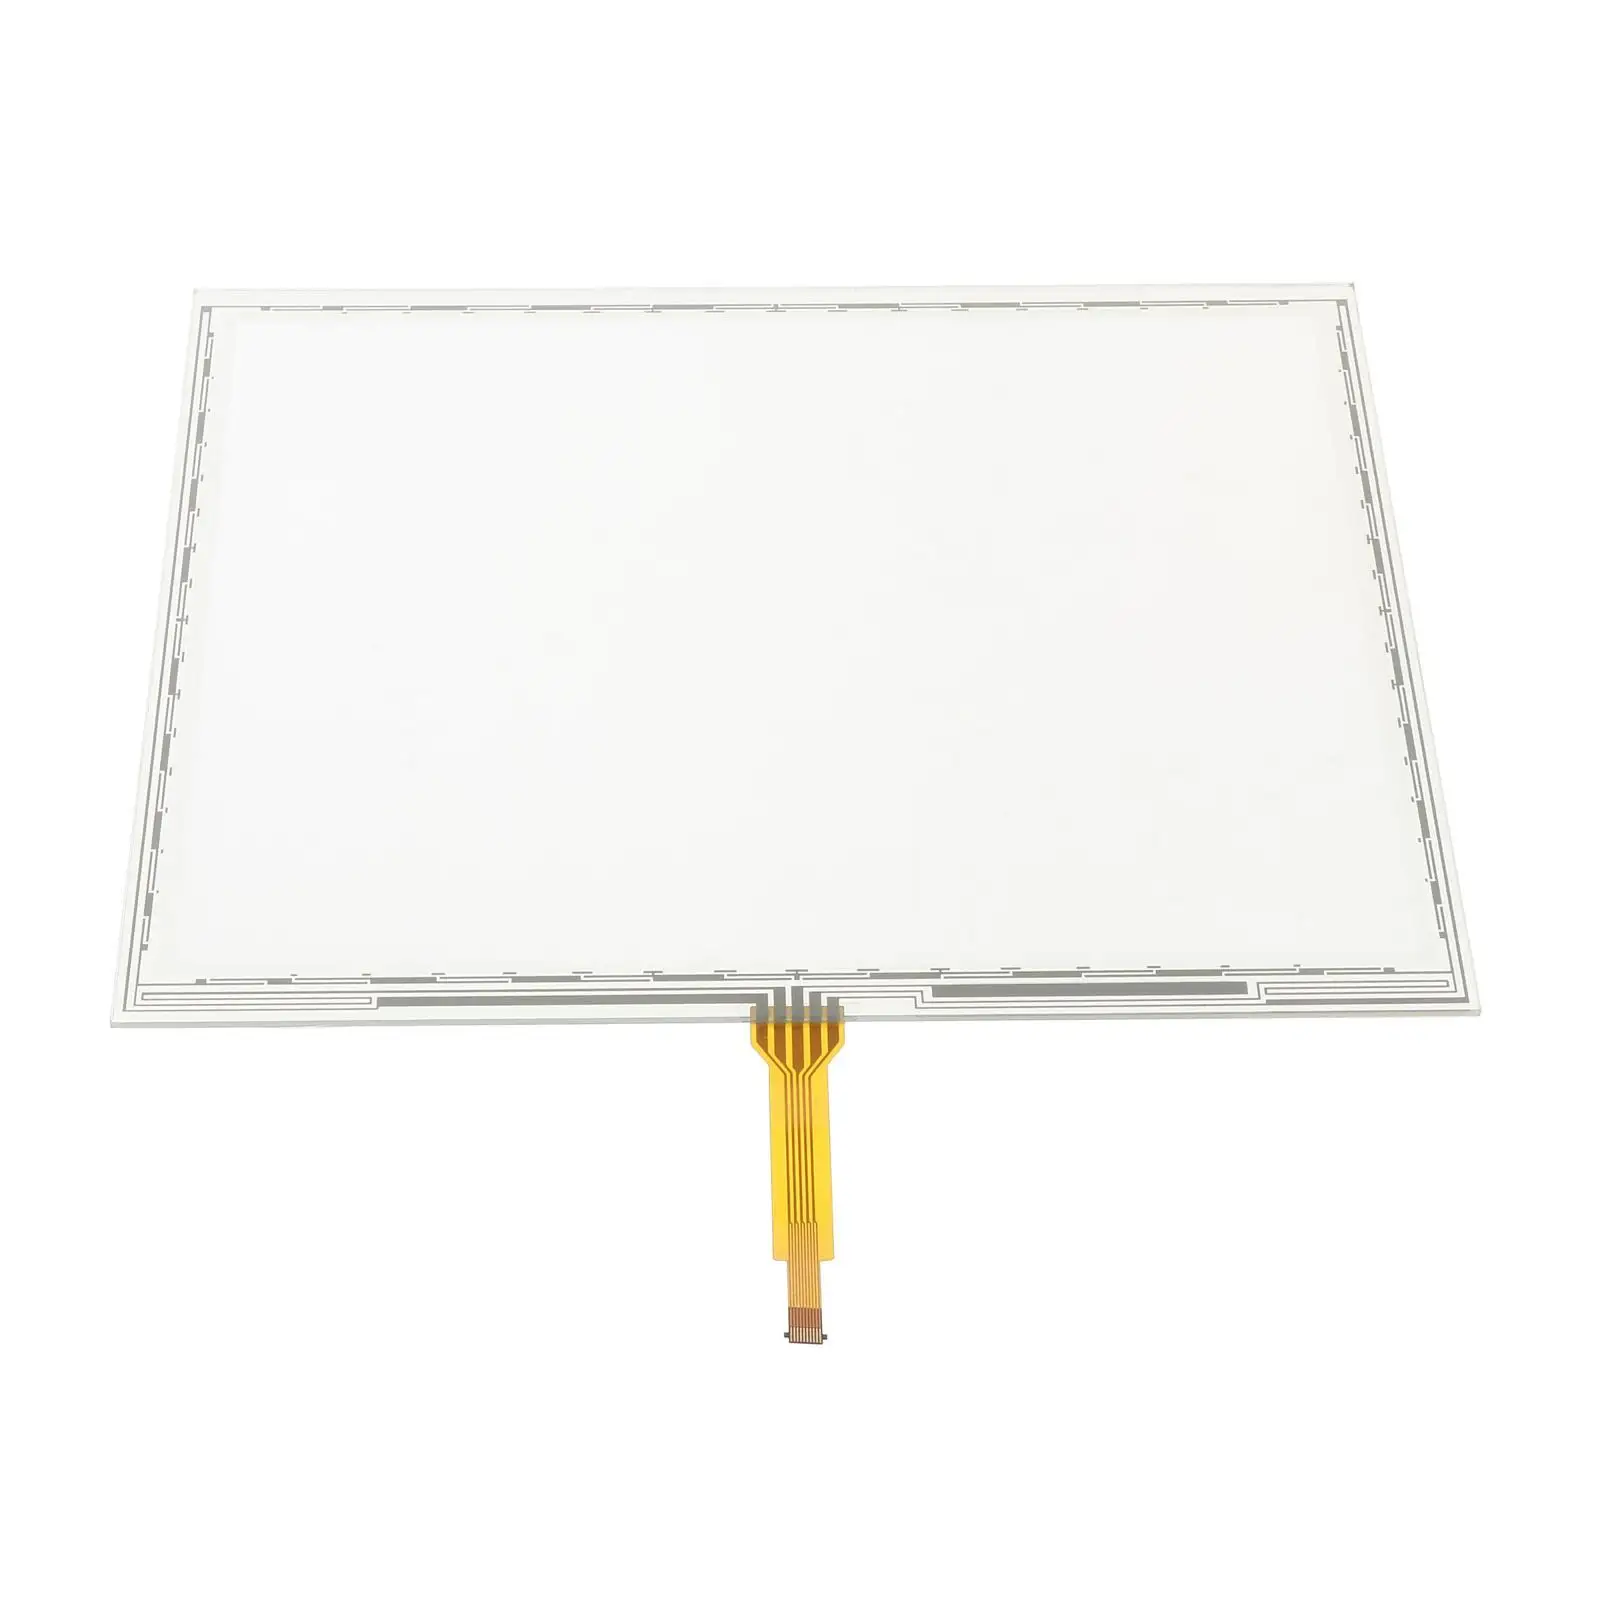 Touch Screen Panel Fpc-863Ne 9.09inchx7.17inch Digital Panel for 4640 Easy to Install Replacement Parts Durable